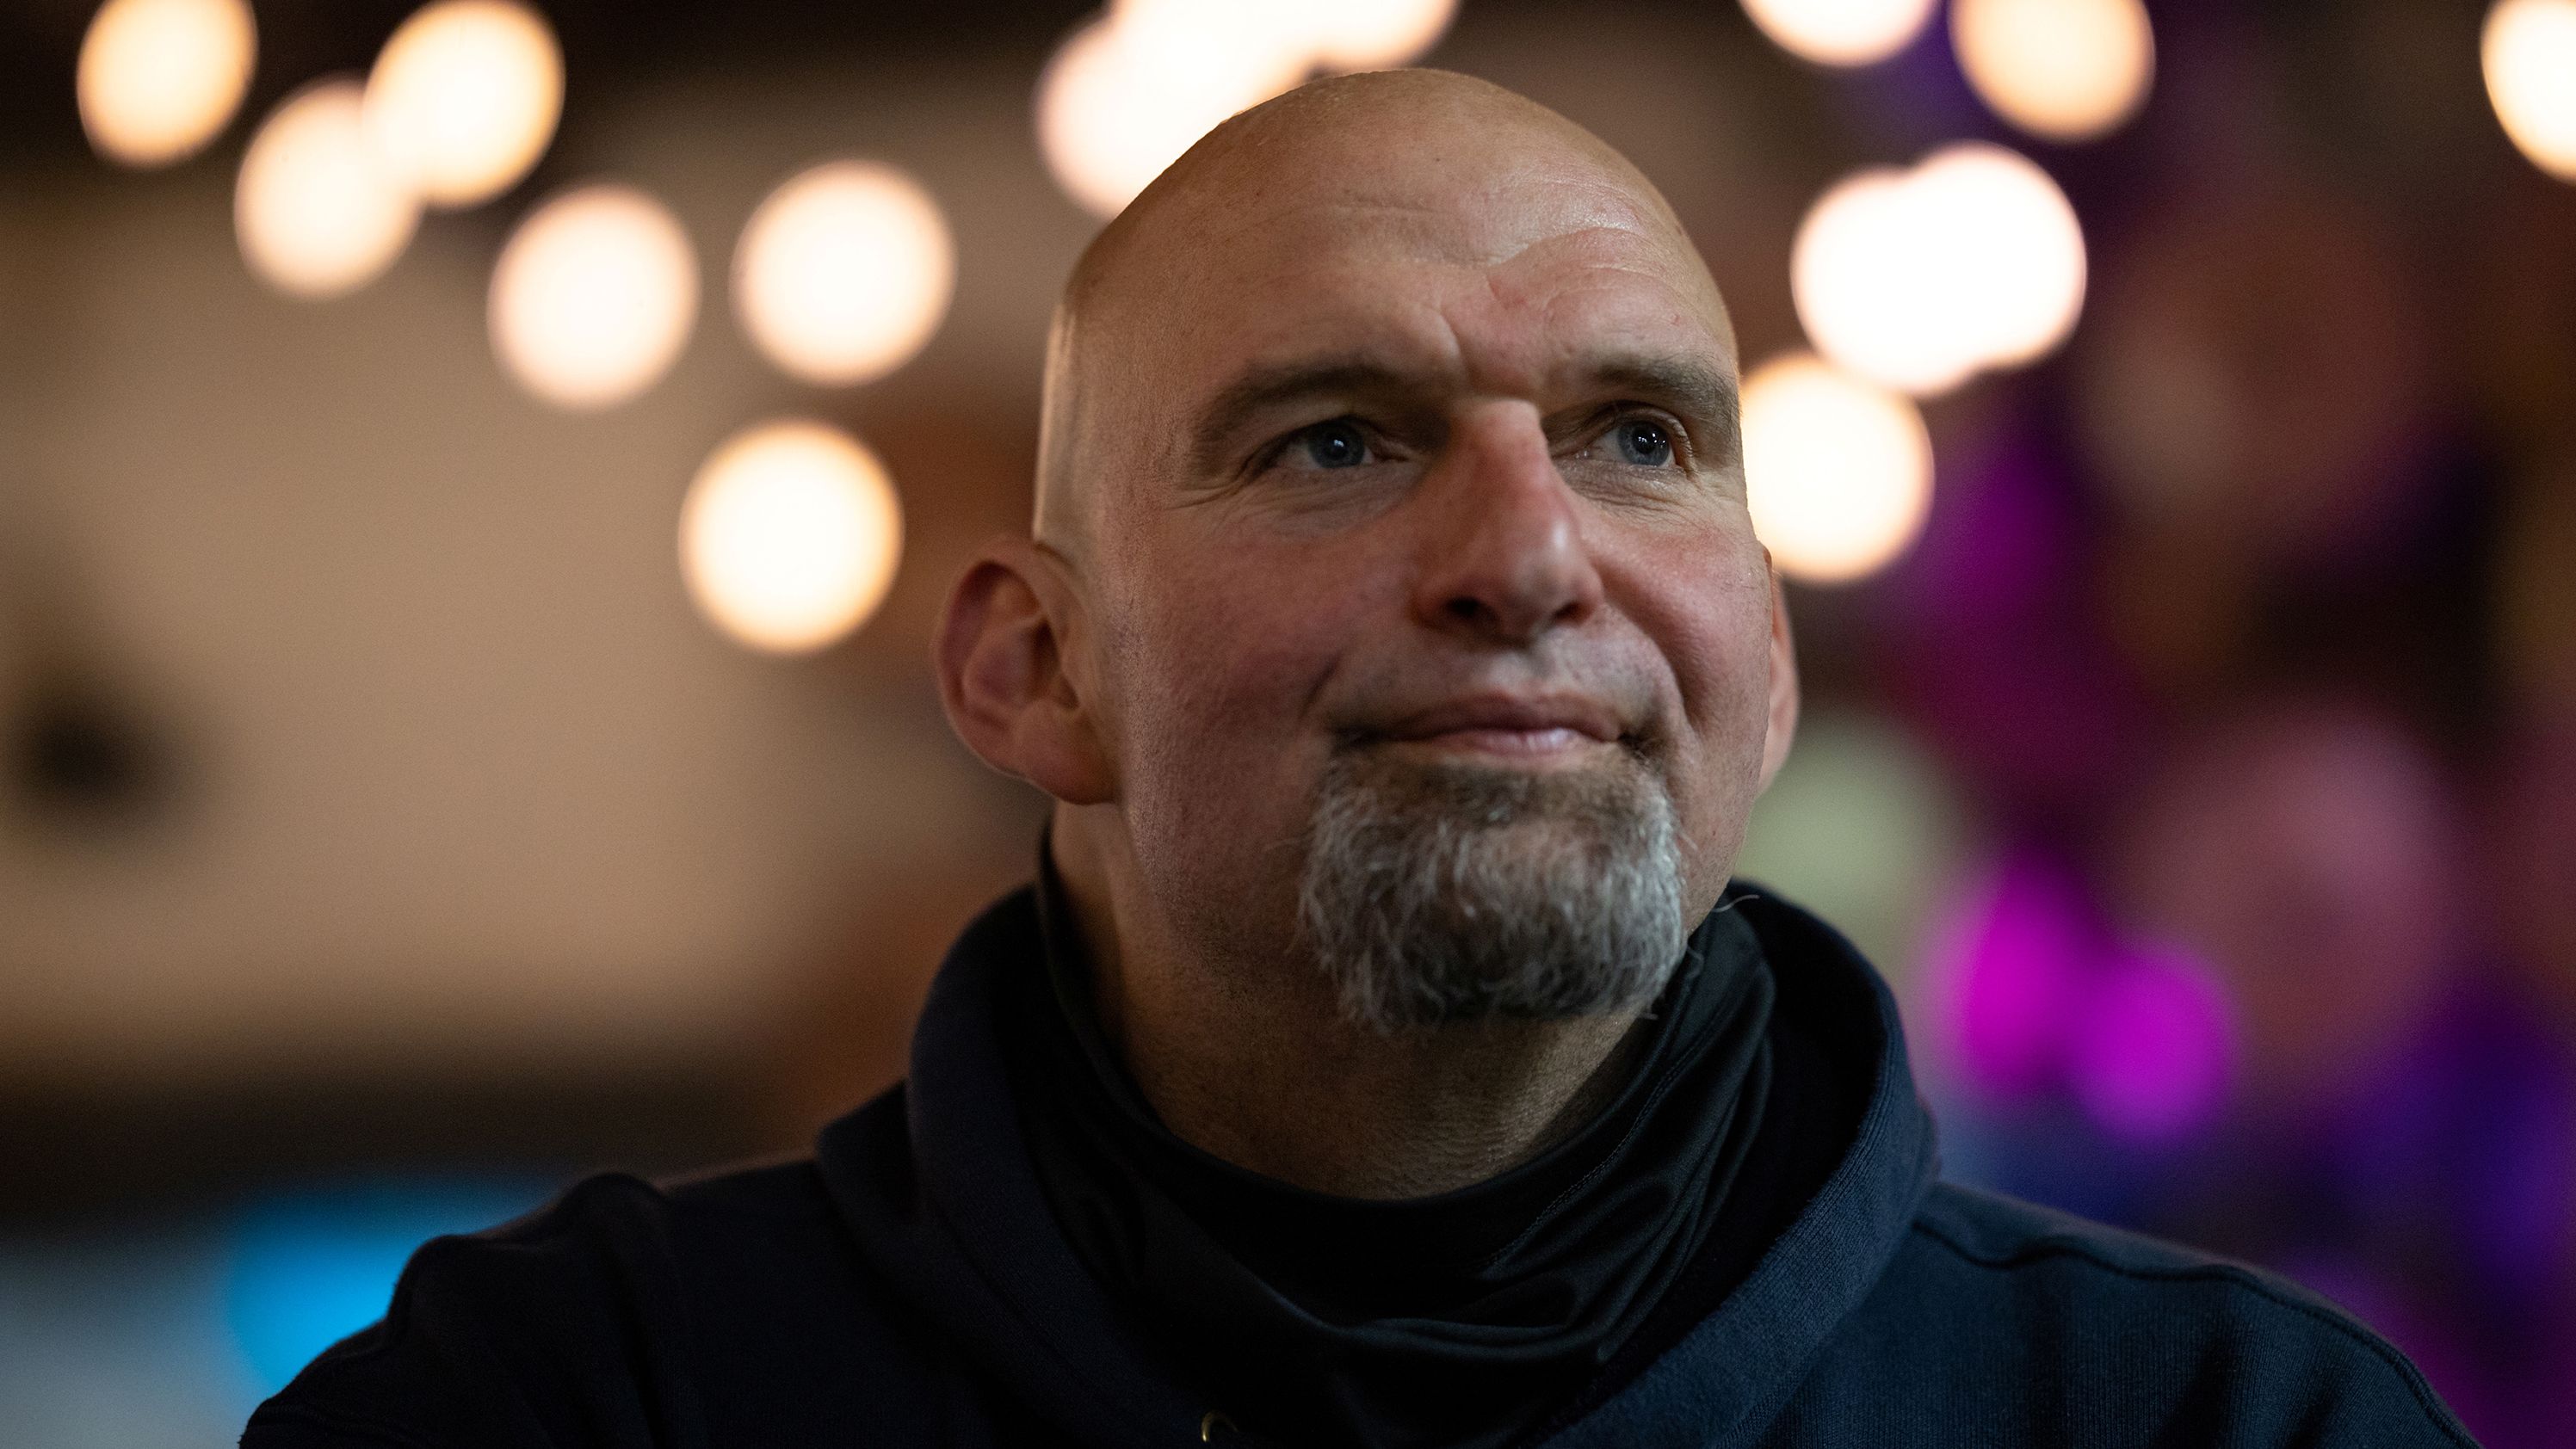 Lt. Gov. John Fetterman poses for a portrait at a meet-and-greet at the Weyerbacher Brewing Company in Easton, Pennsylvania, on May 1, 2022. 